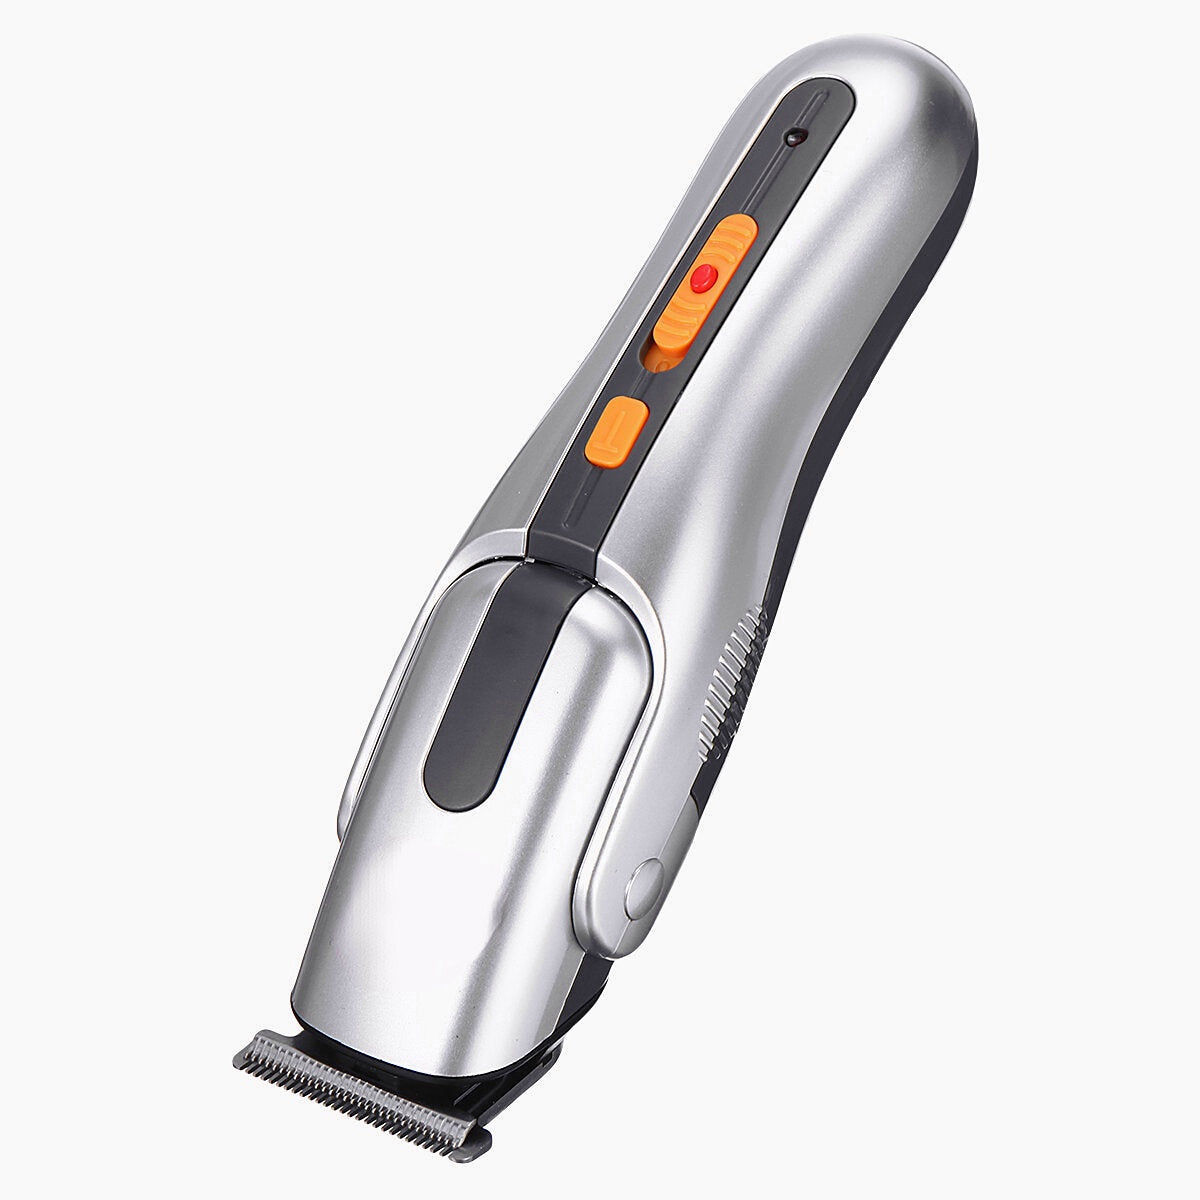 8 in 1 Electric Hair Clipper IPX7 Waterproof Rechargeable Hair Trimmer Shaver With 3 Limit Comb